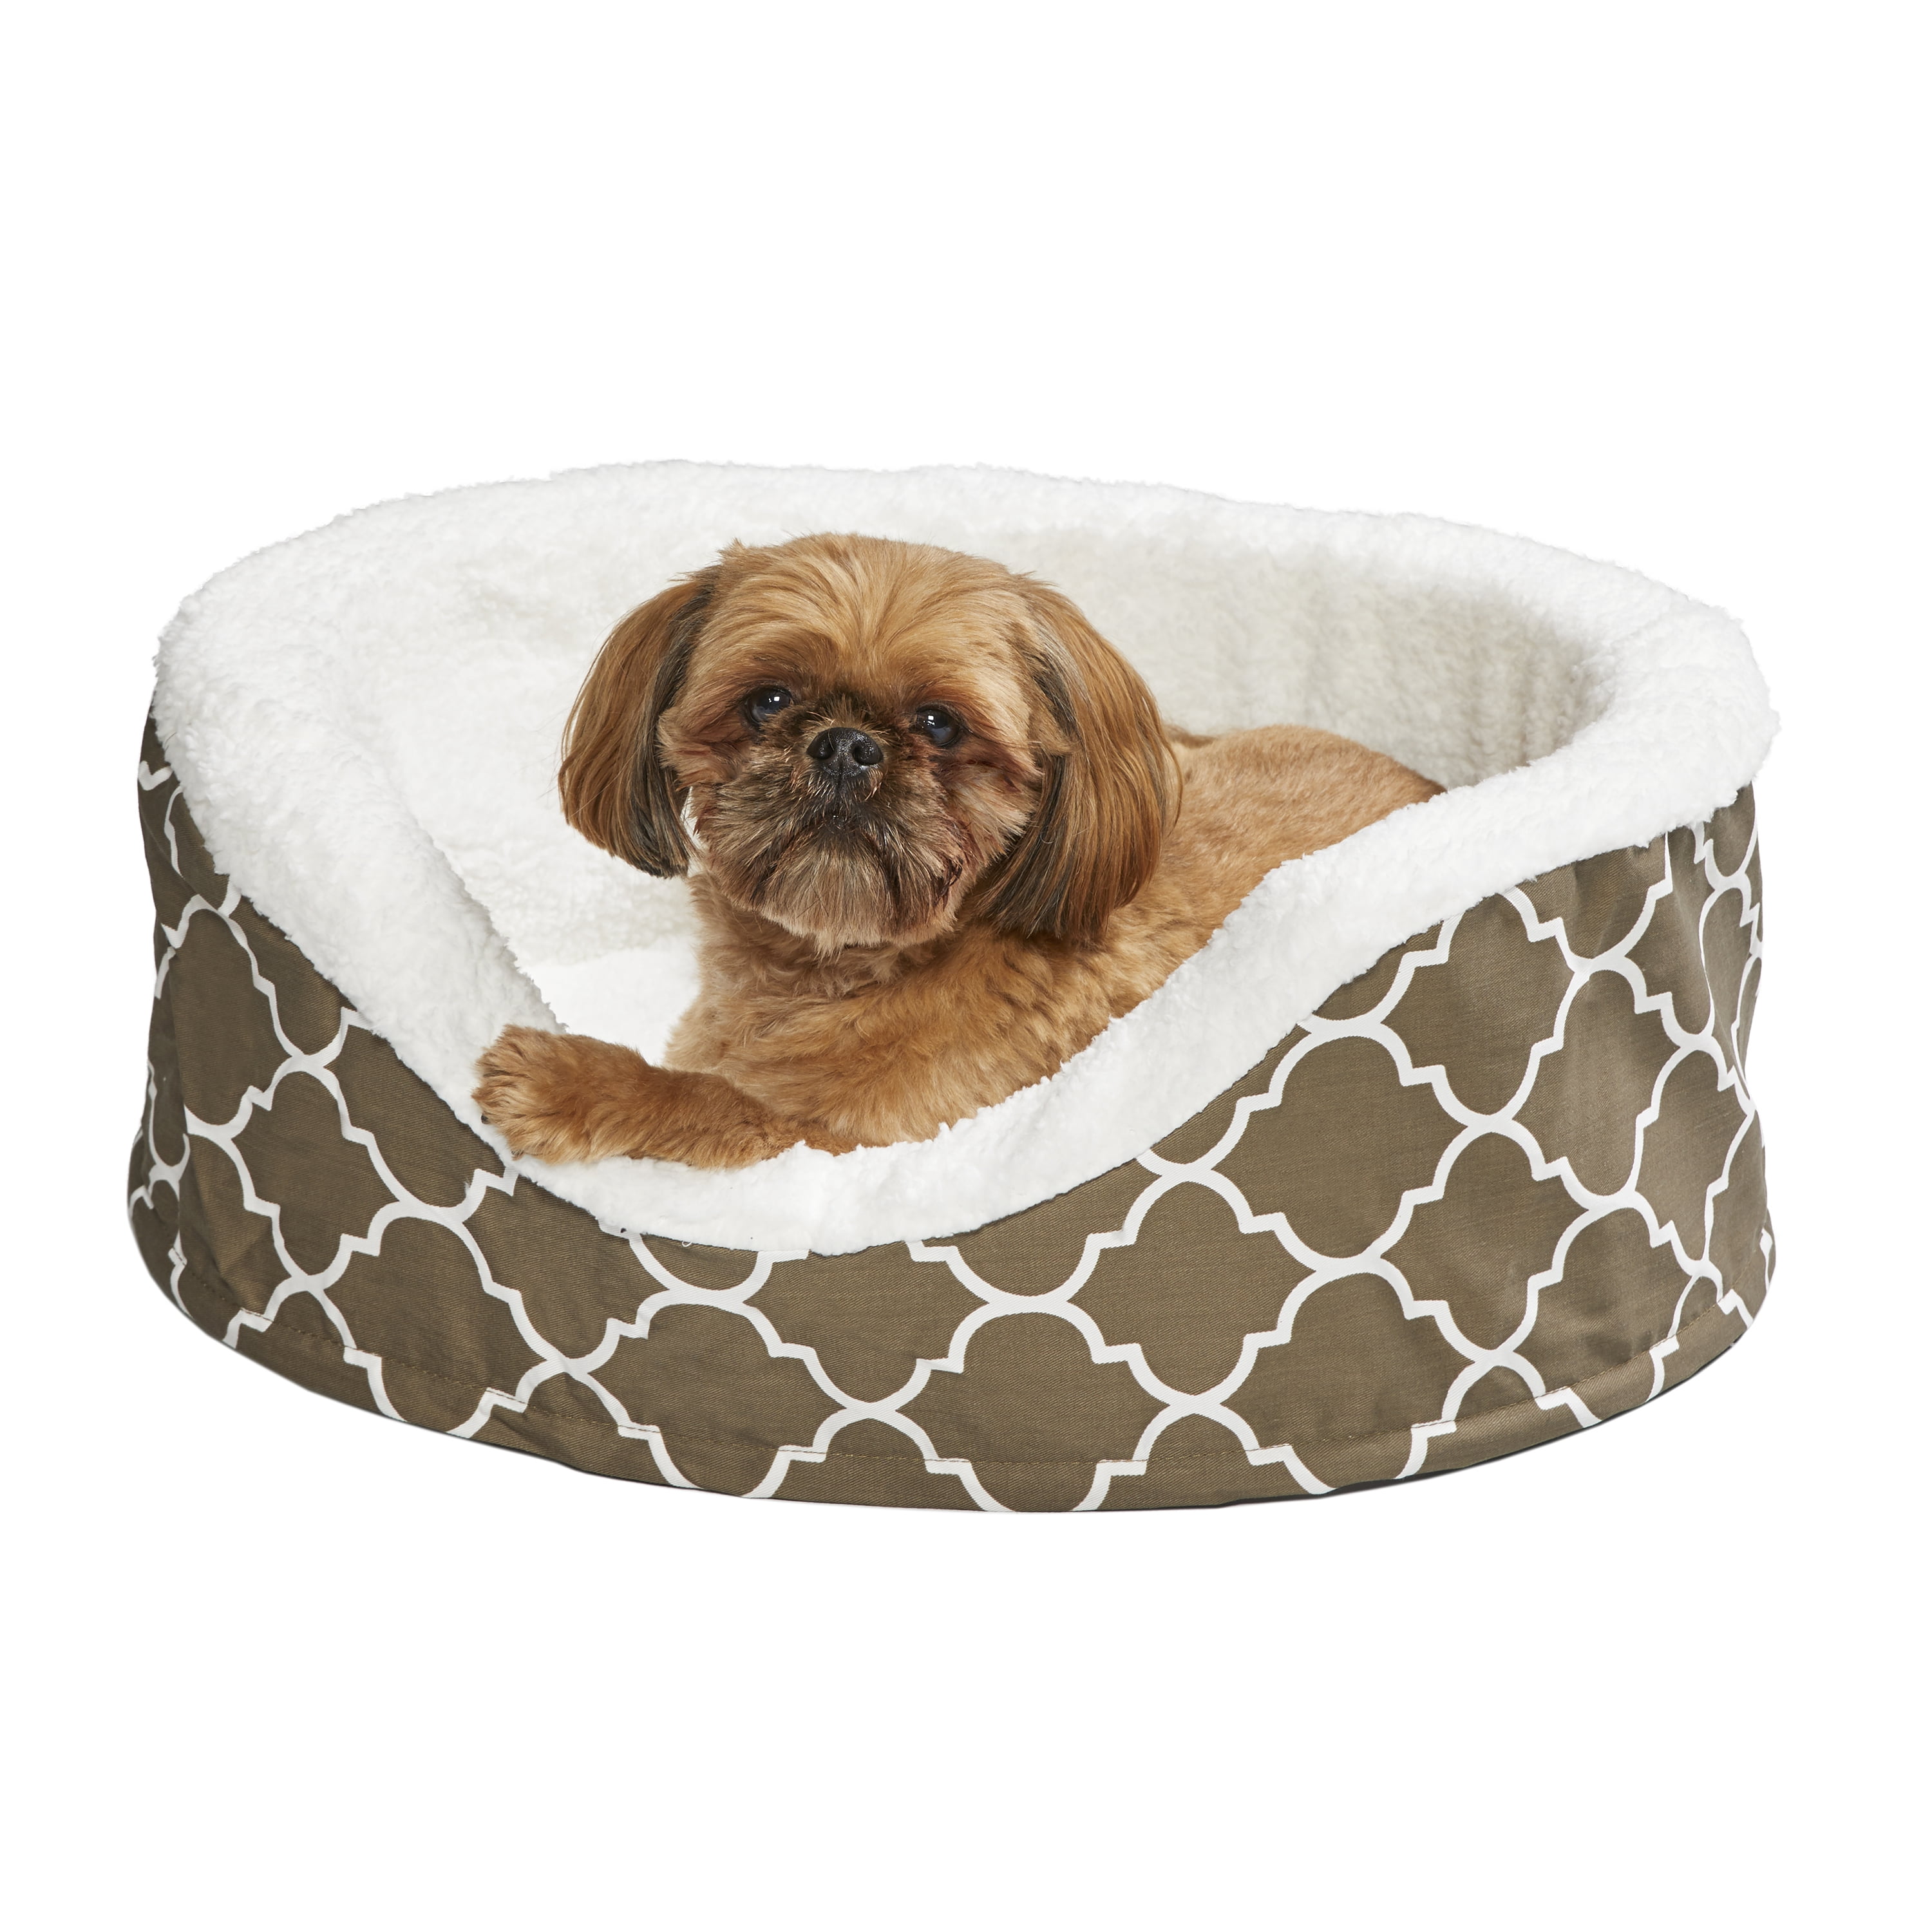 Quiet Time MidWest Orthopedic Nesting Dog Bed with Teflon, Small, Brown